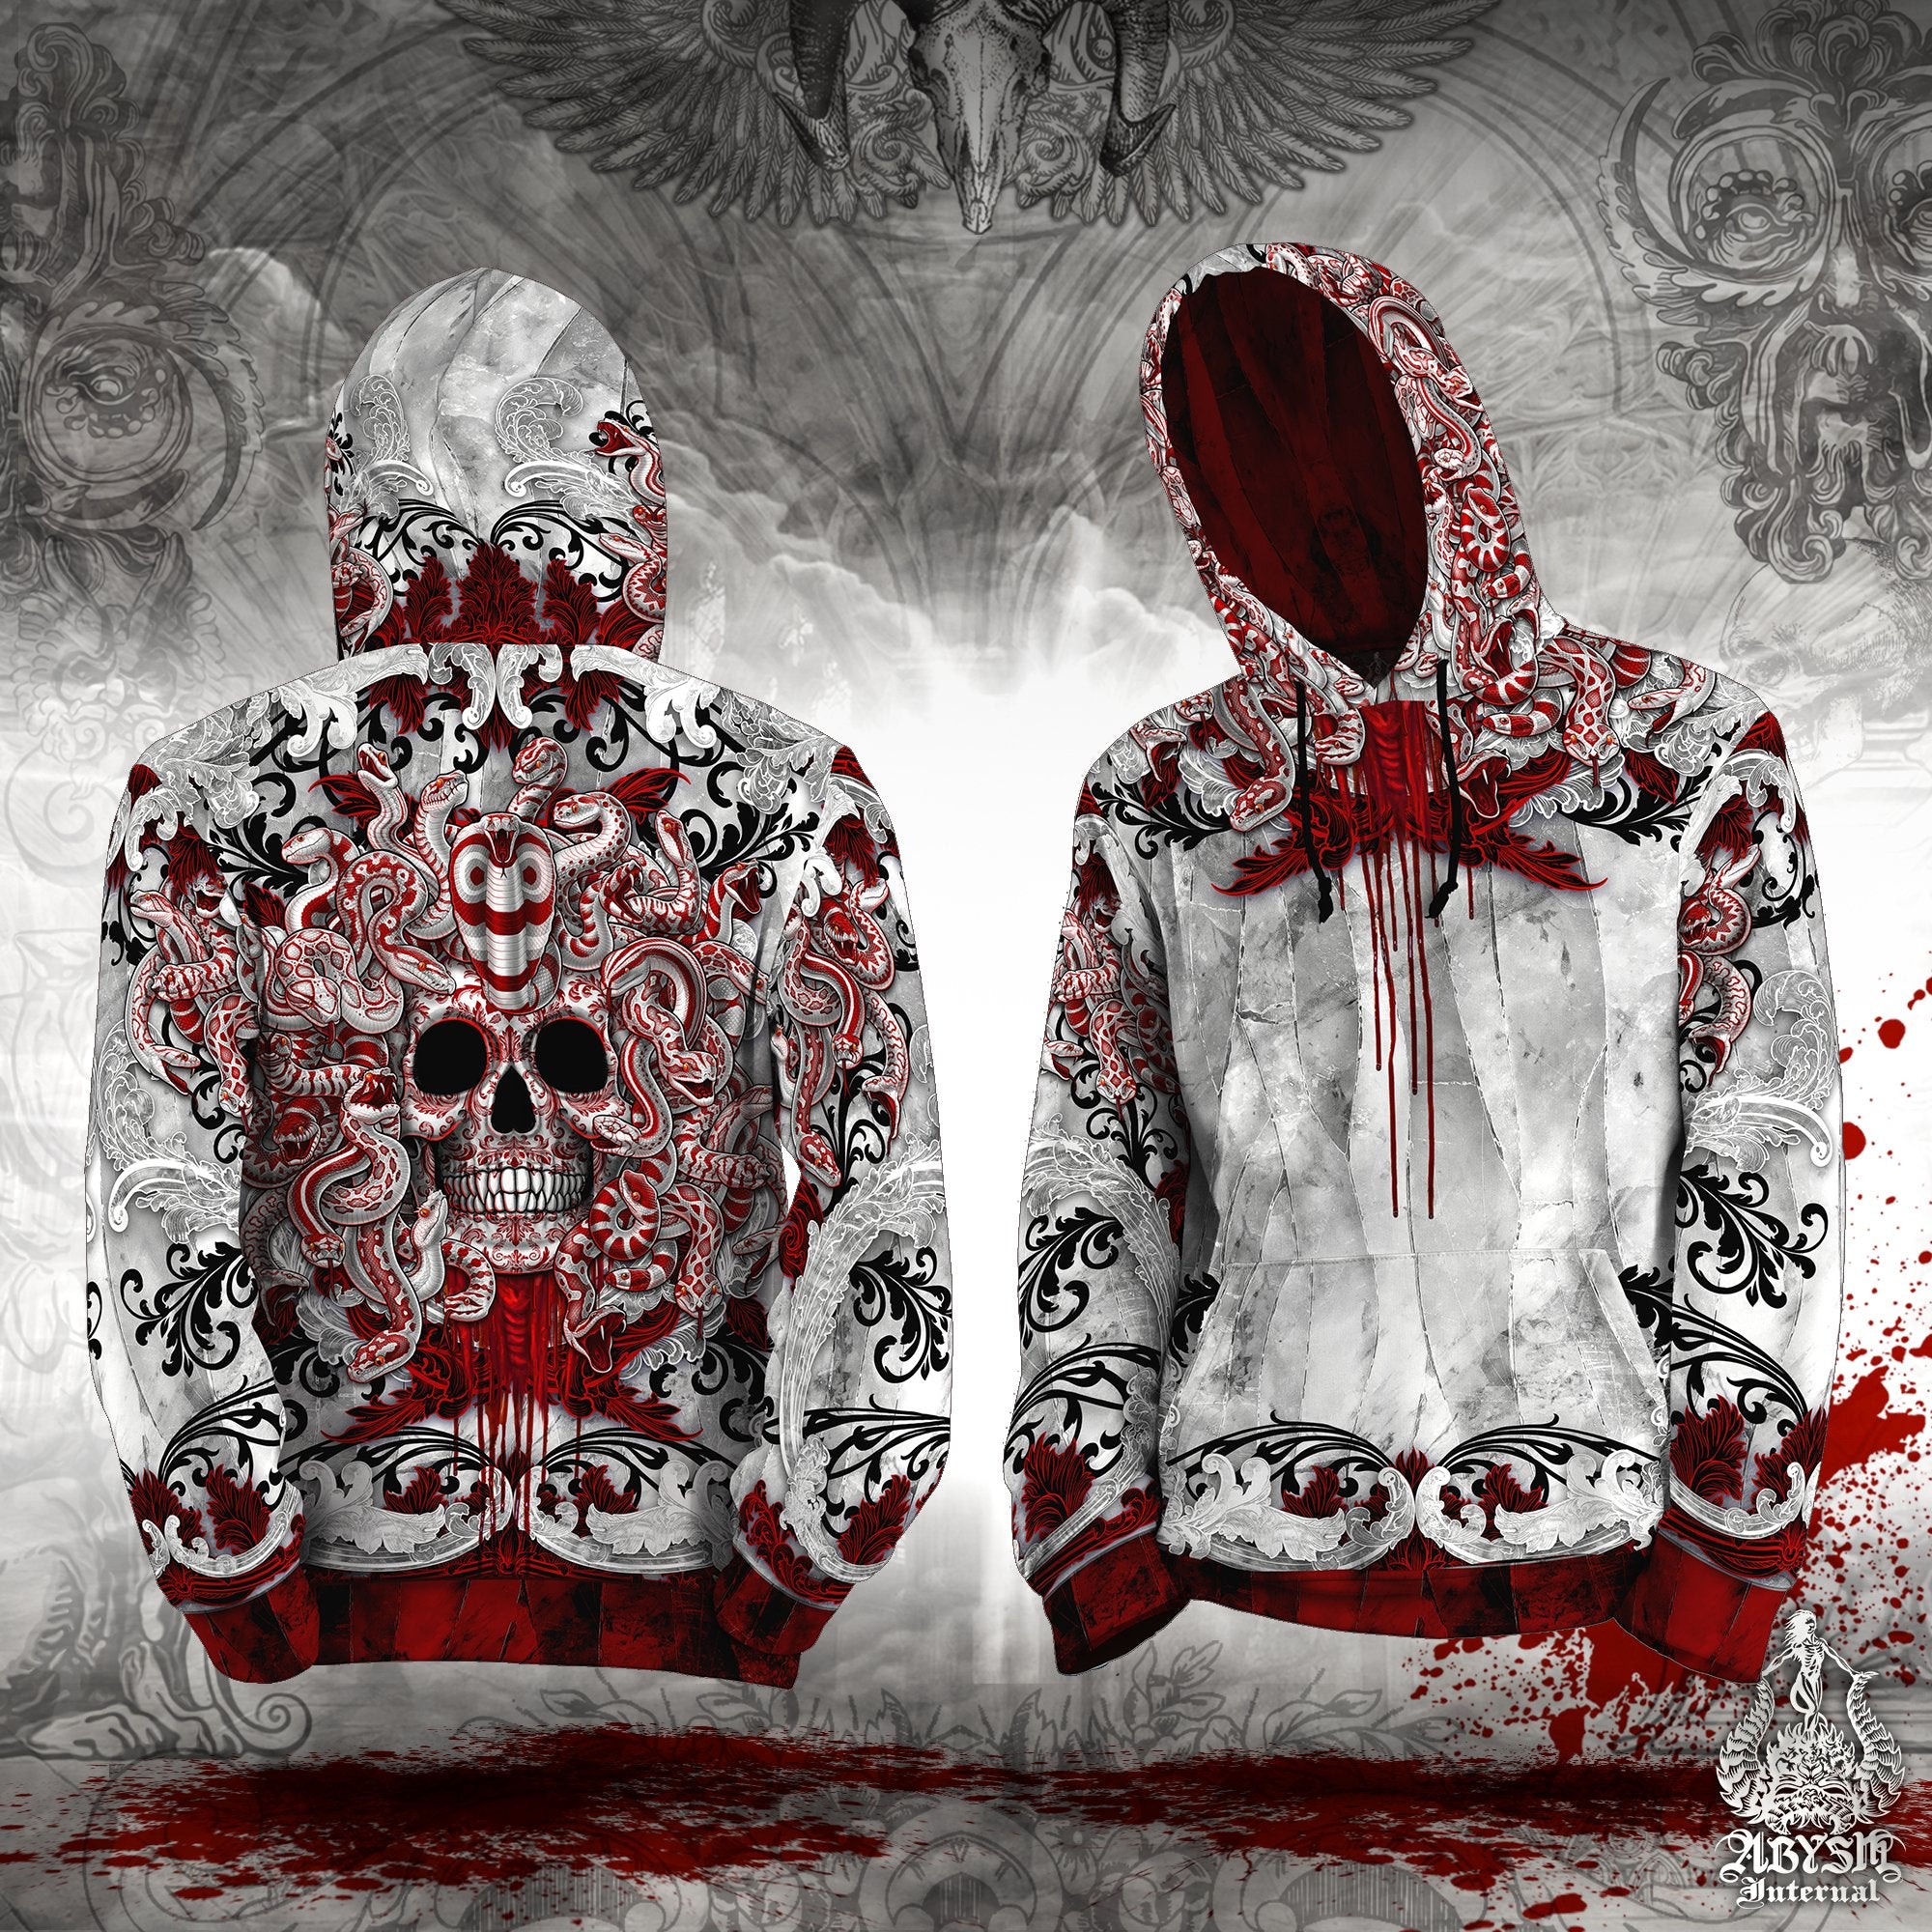 White Gothic Hoodie, Goth Skull Pullover, Horror Streetwear, Street Outfit, Graffiti Sweater, Alternative Clothing, Unisex - Medusa, Bloody Goth, 2 Faces - Abysm Internal